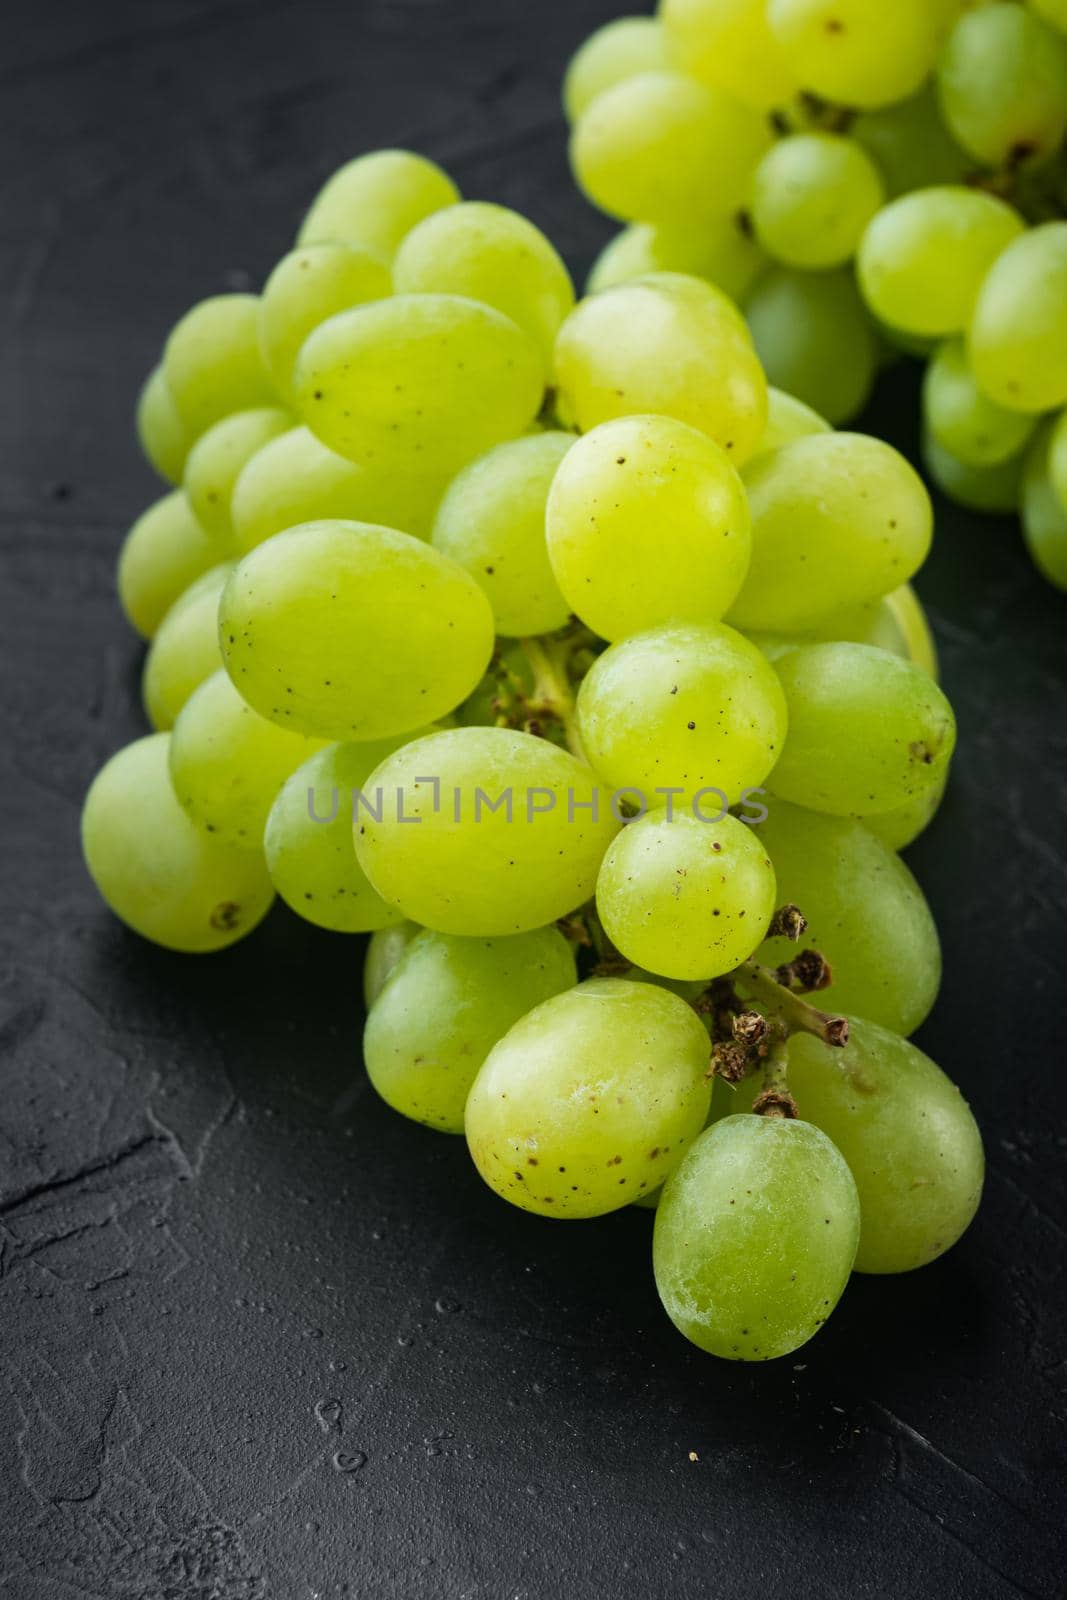 Red and white grapes, green fruits, on black stone background by Ilianesolenyi